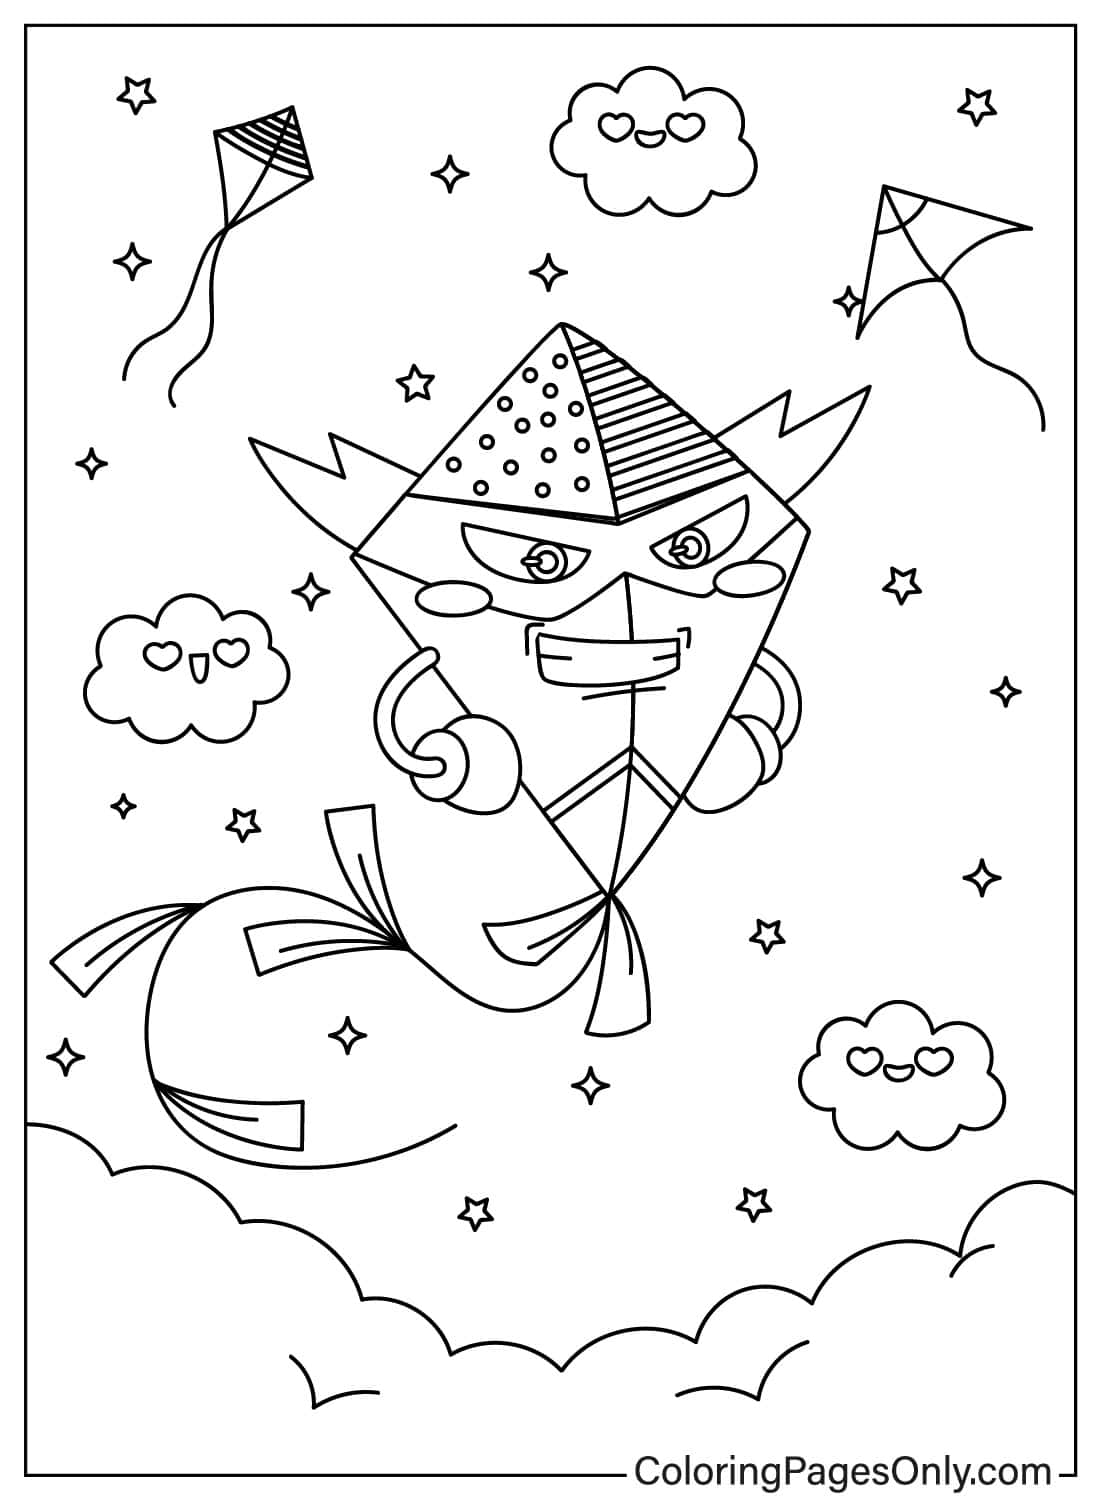 Angry Kite in the Starry Sky from Kite